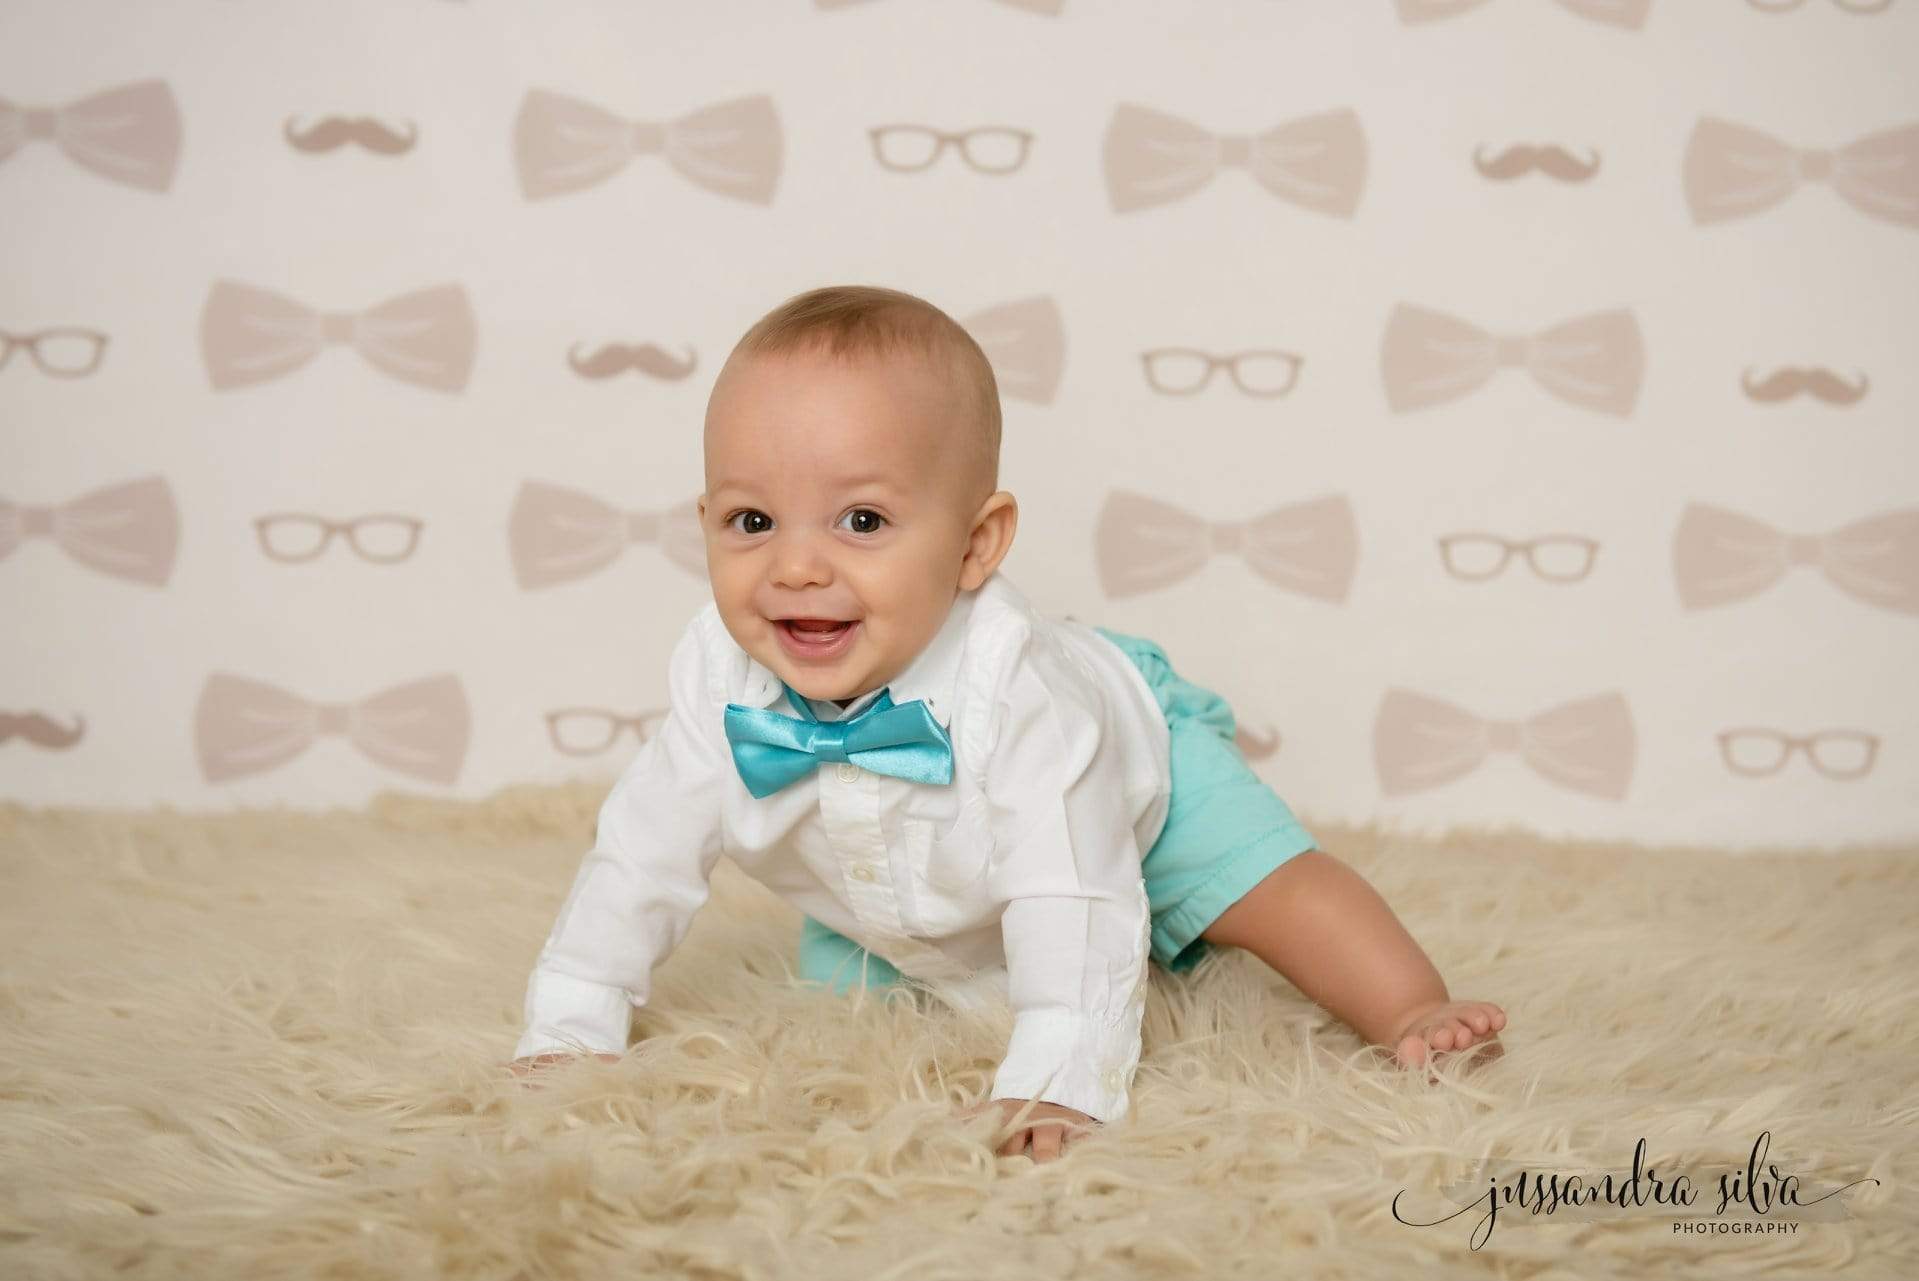 Kate Bowties for Little Guys in Brown Father's Day Backdrop for Photography Designed by Amanda Moffatt